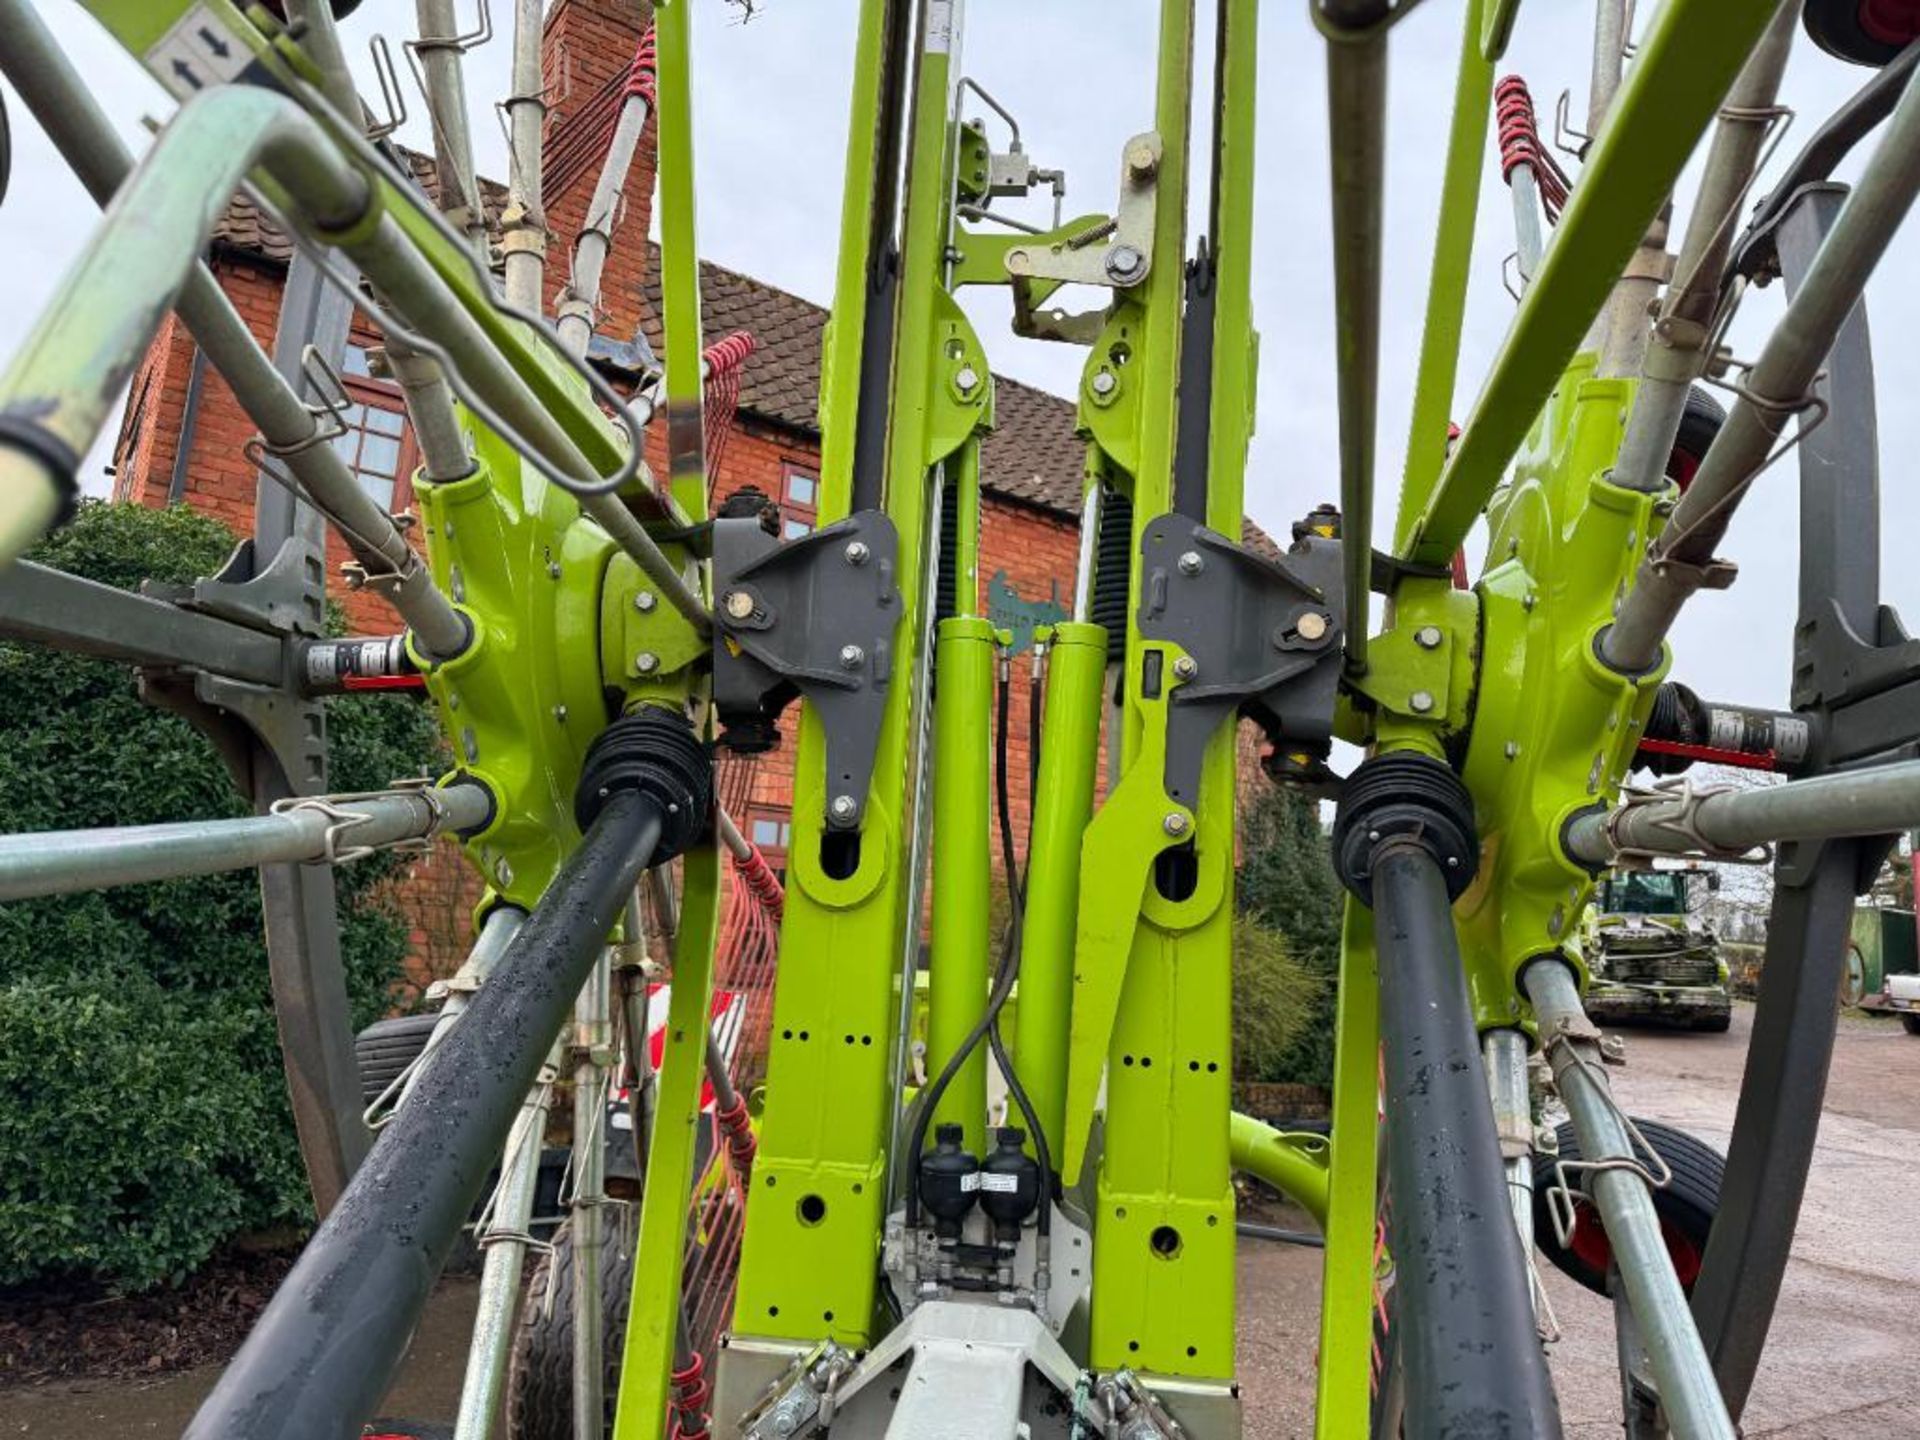 2019 Claas Liner 2900 twin rotor hydraulic folding rake on 15.0/55-17 wheels and tyres. Serial No: W - Image 14 of 14